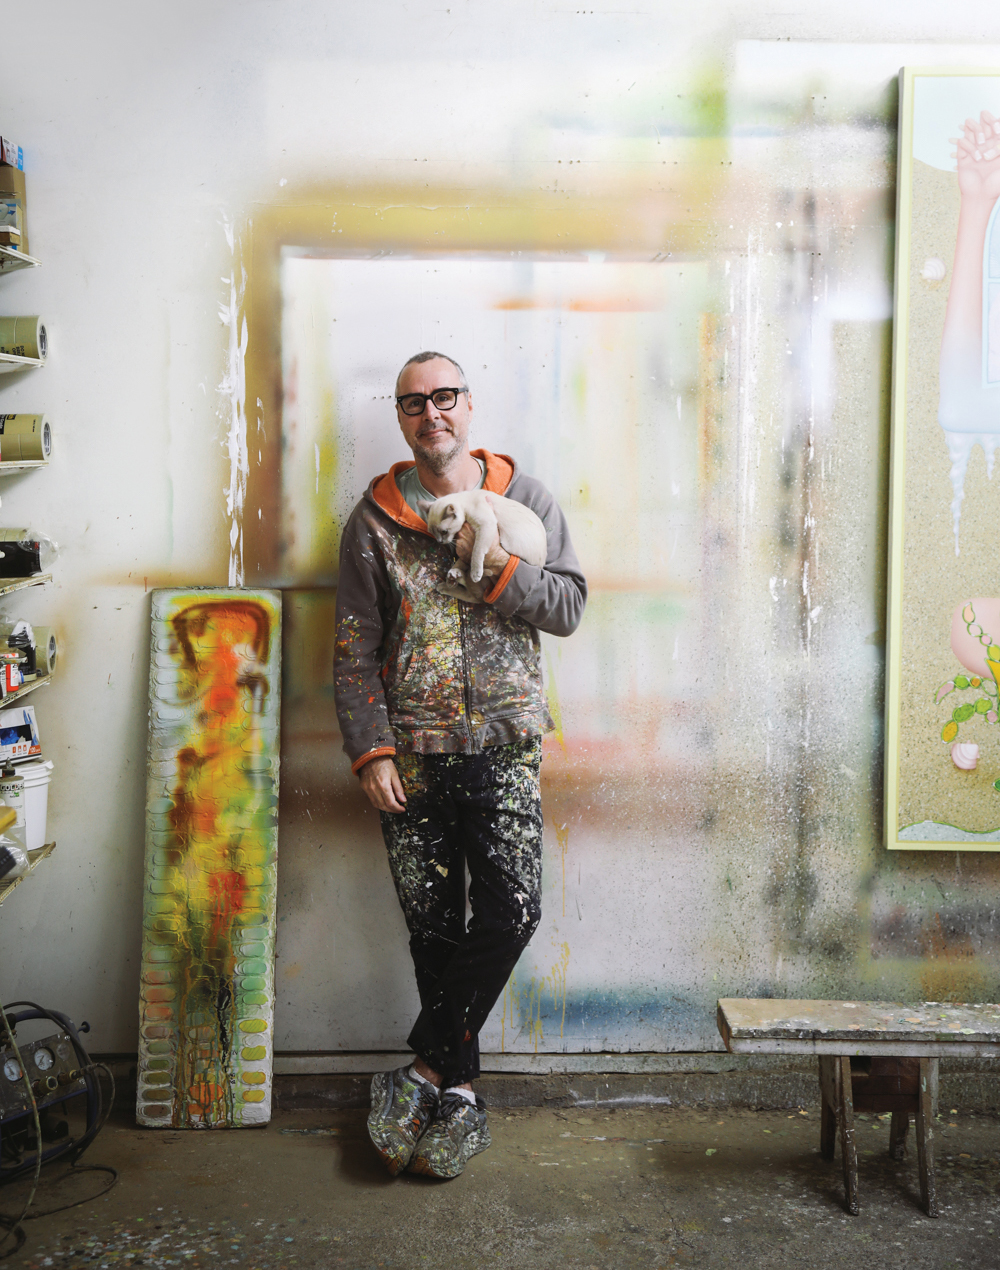 man in paint splatted clothing and glasses holding cat while leaning against a paint covered wall near a low workbench